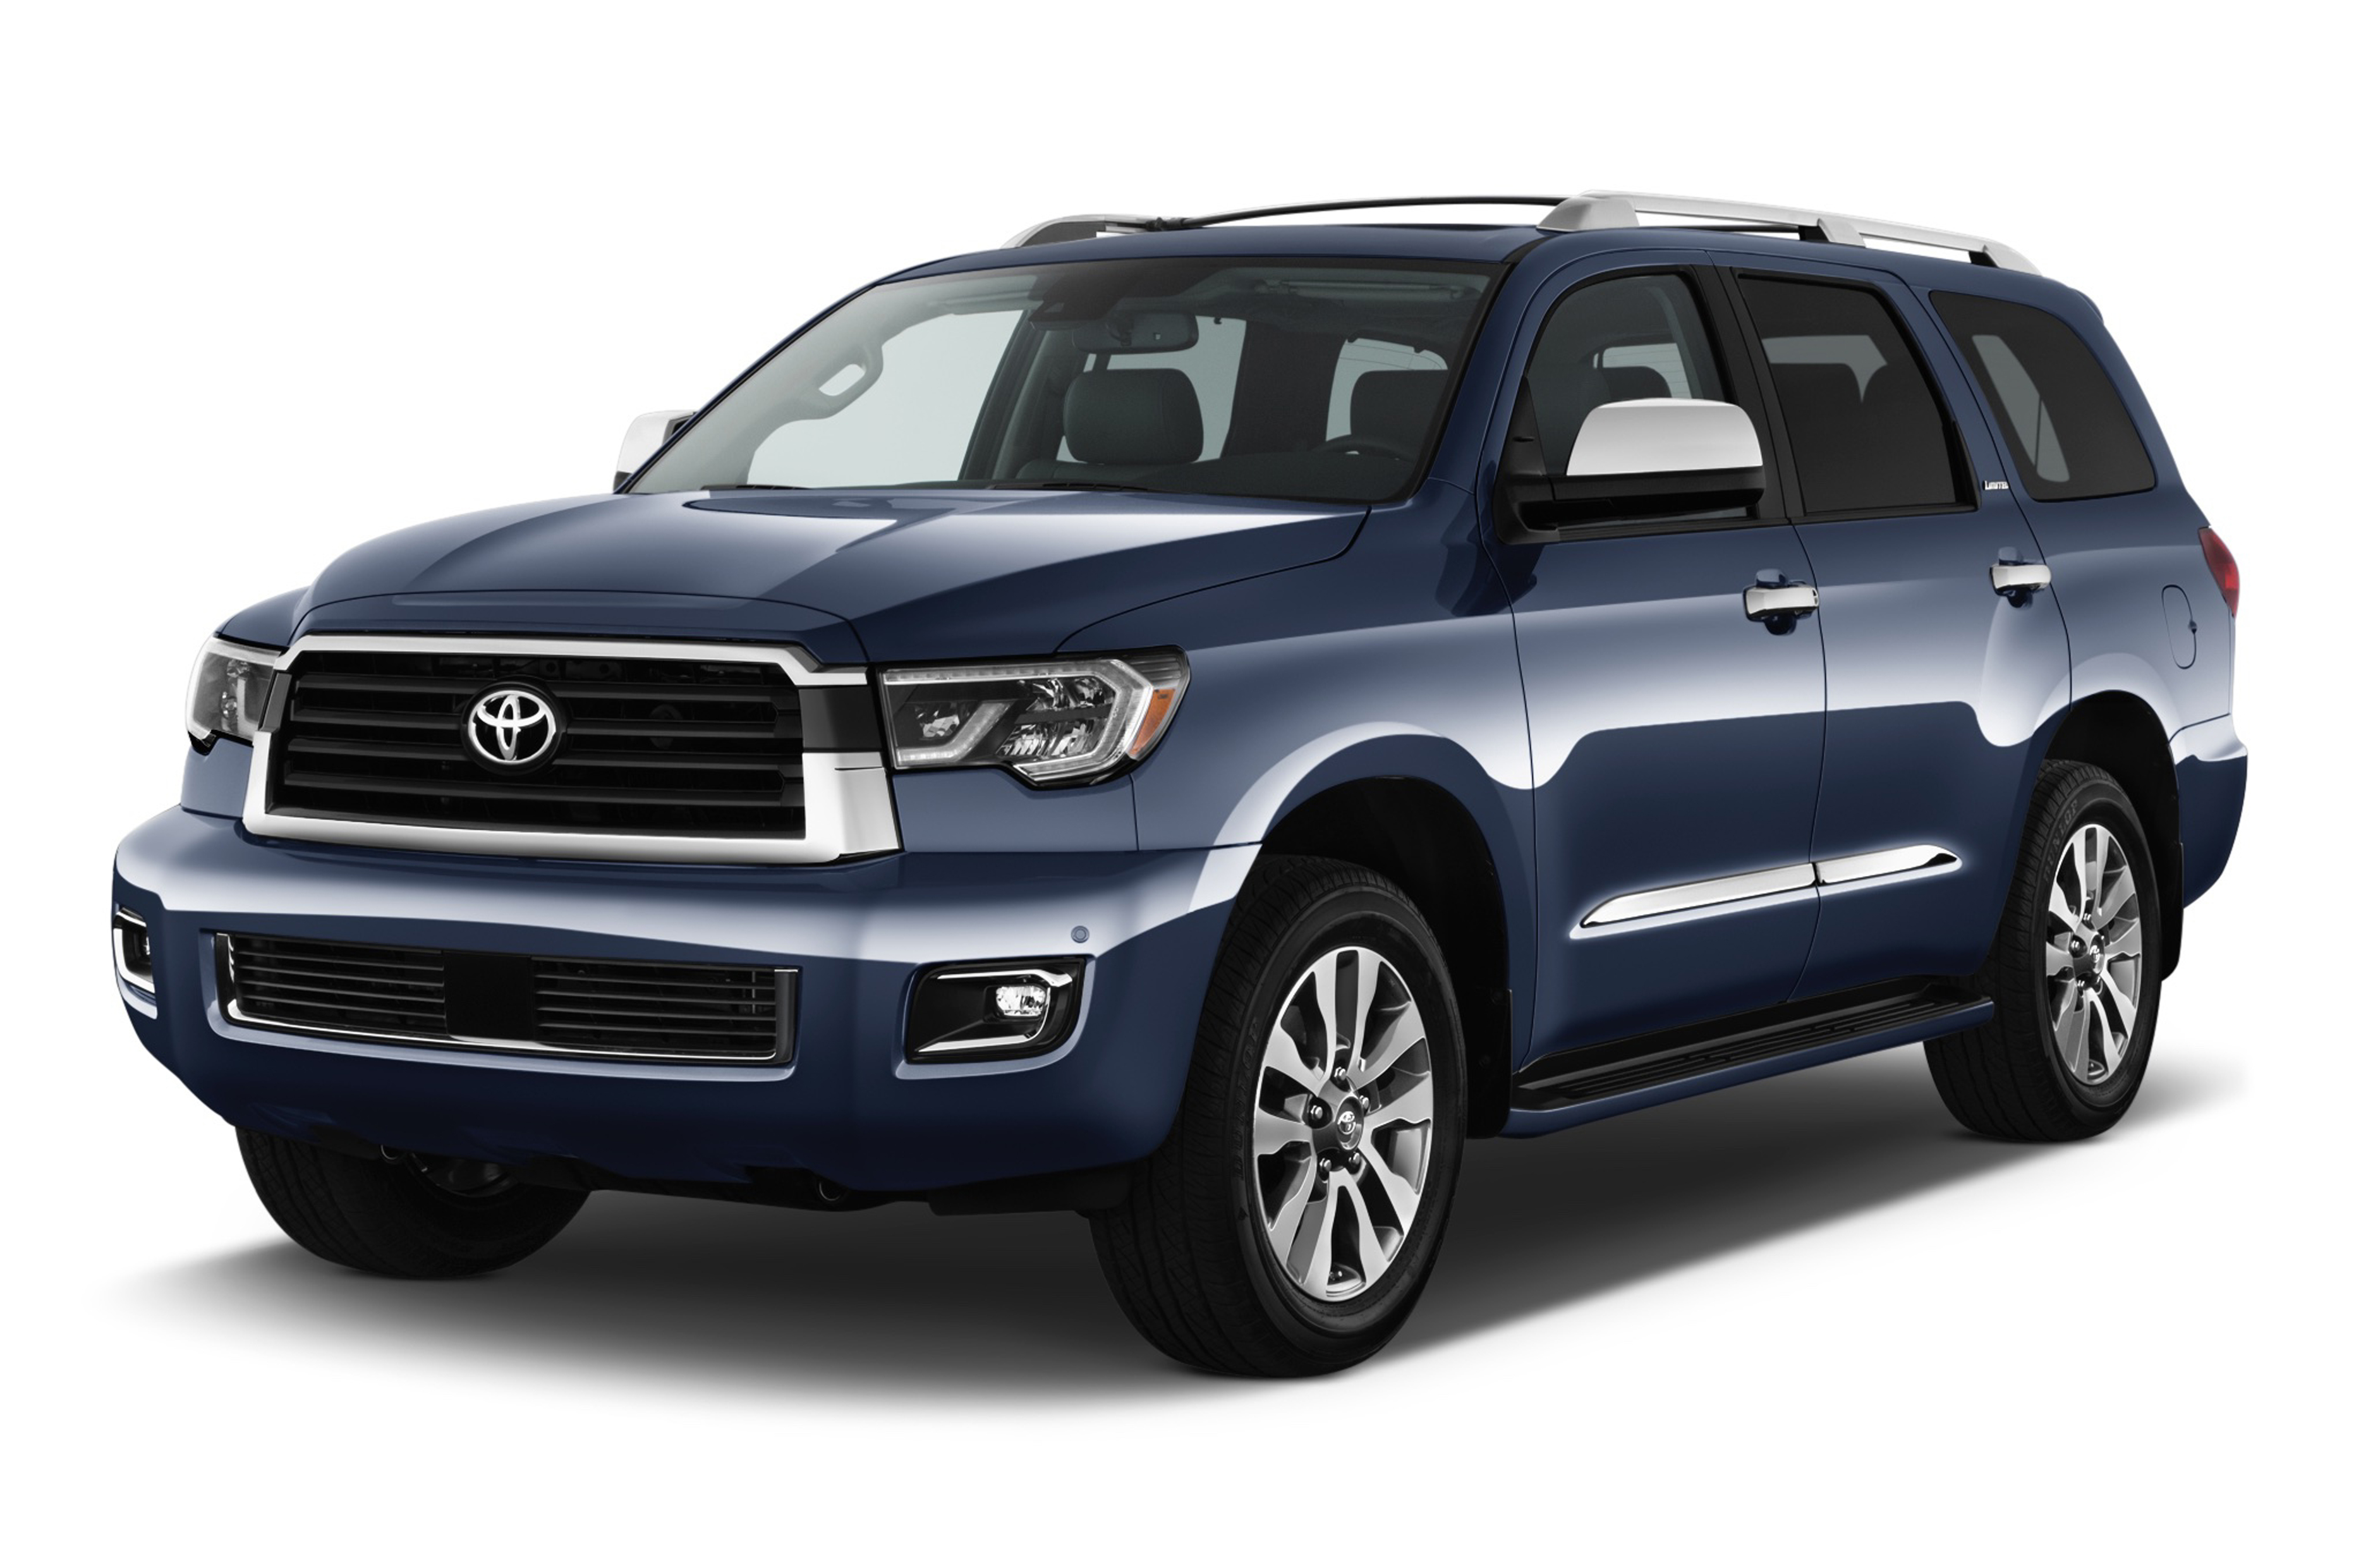 Toyota Sequoia hd specifications